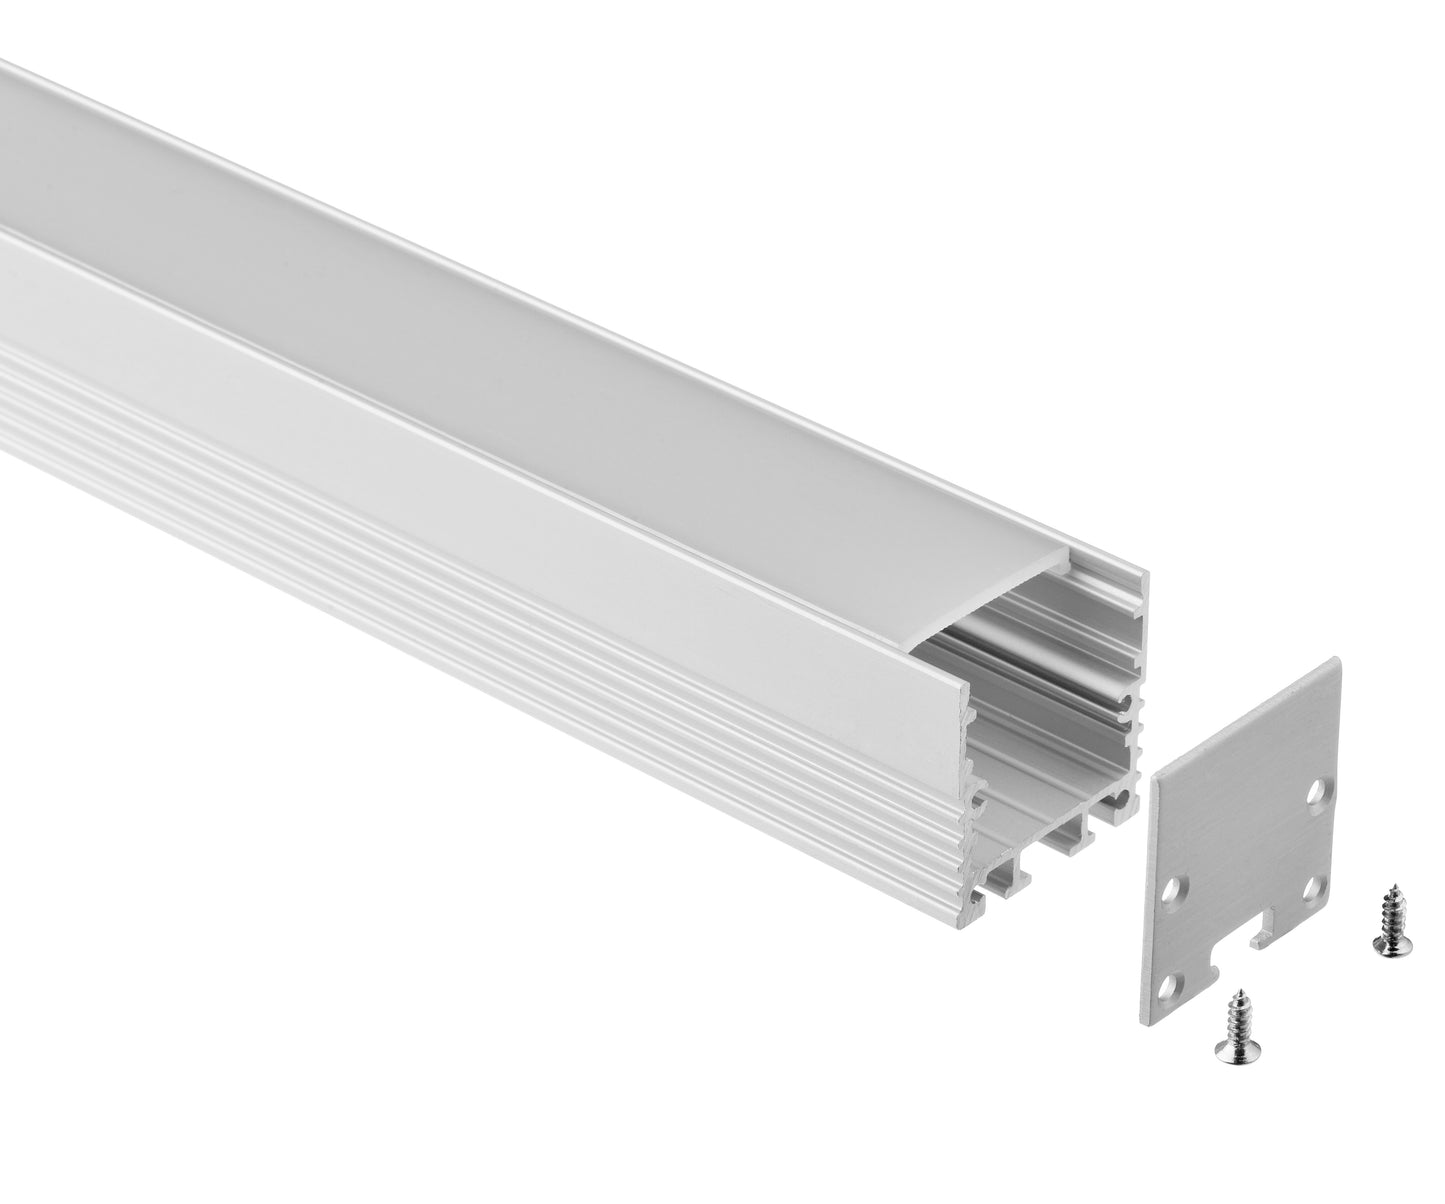 LED Profile Extra Large for Suspension Application